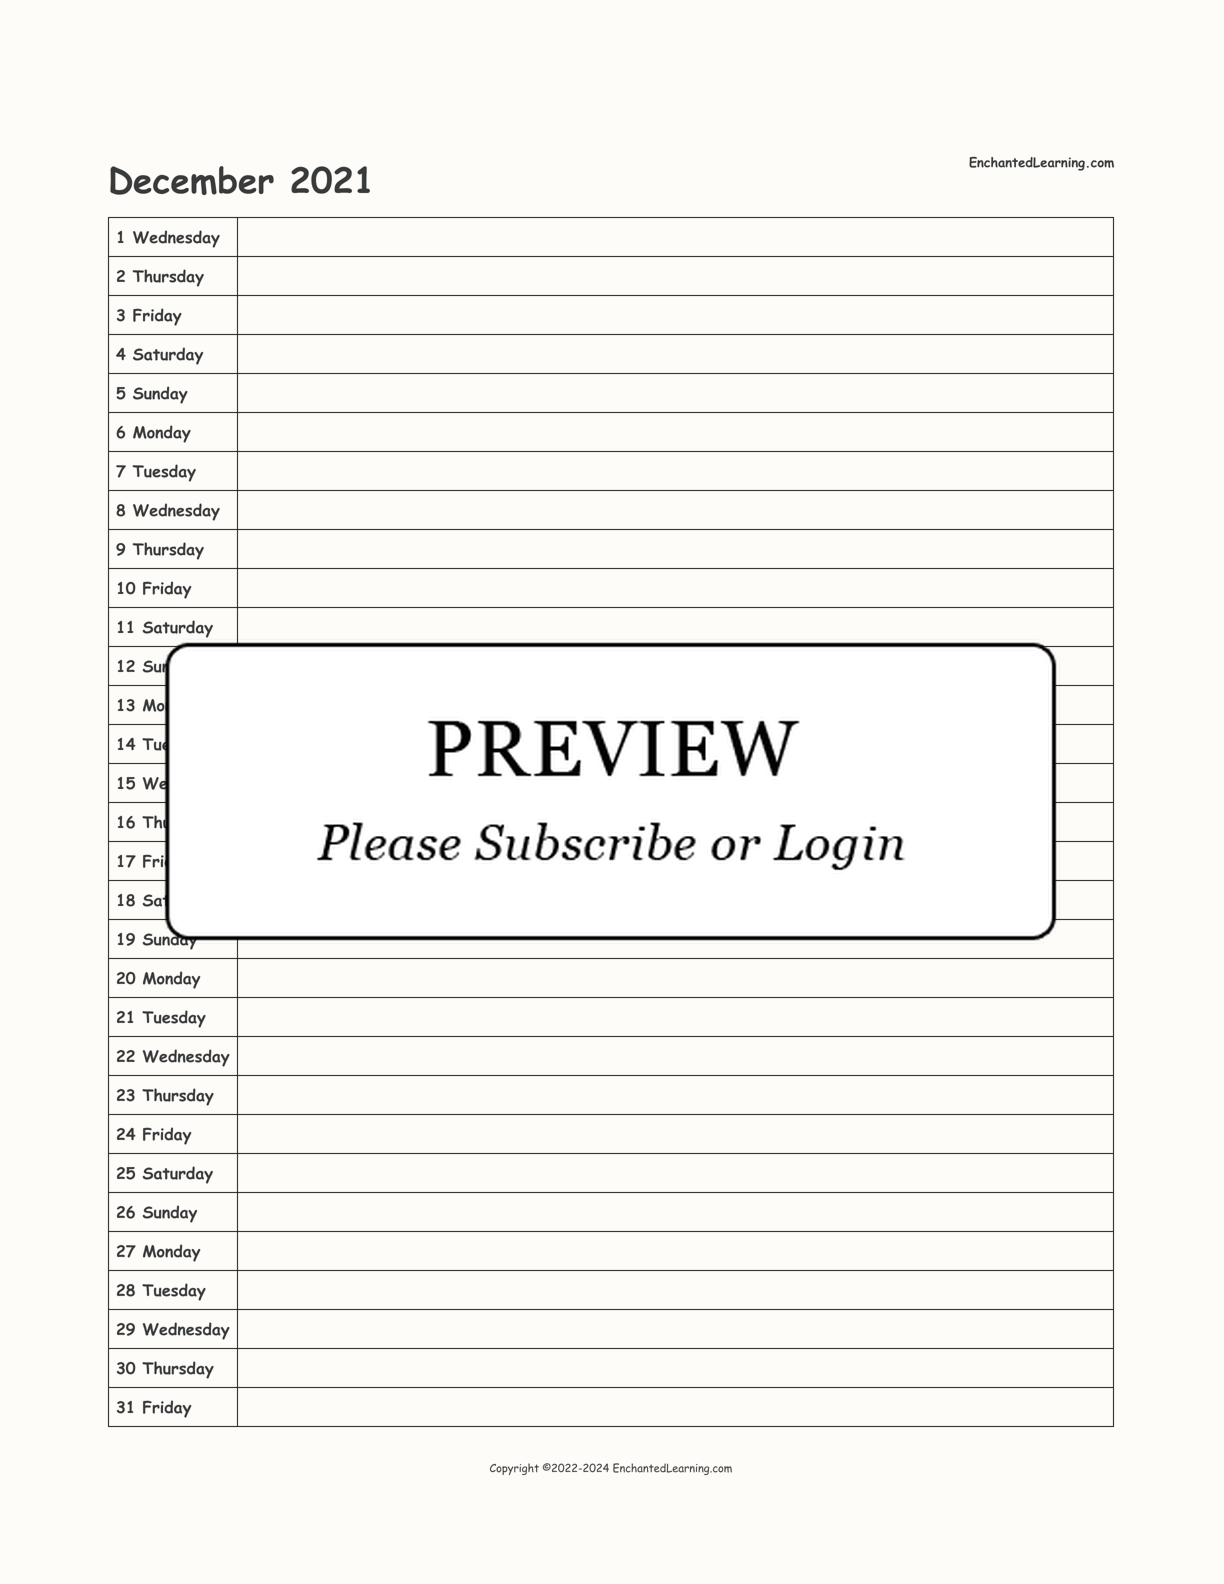 2021 Scheduling Calendar interactive printout page 12